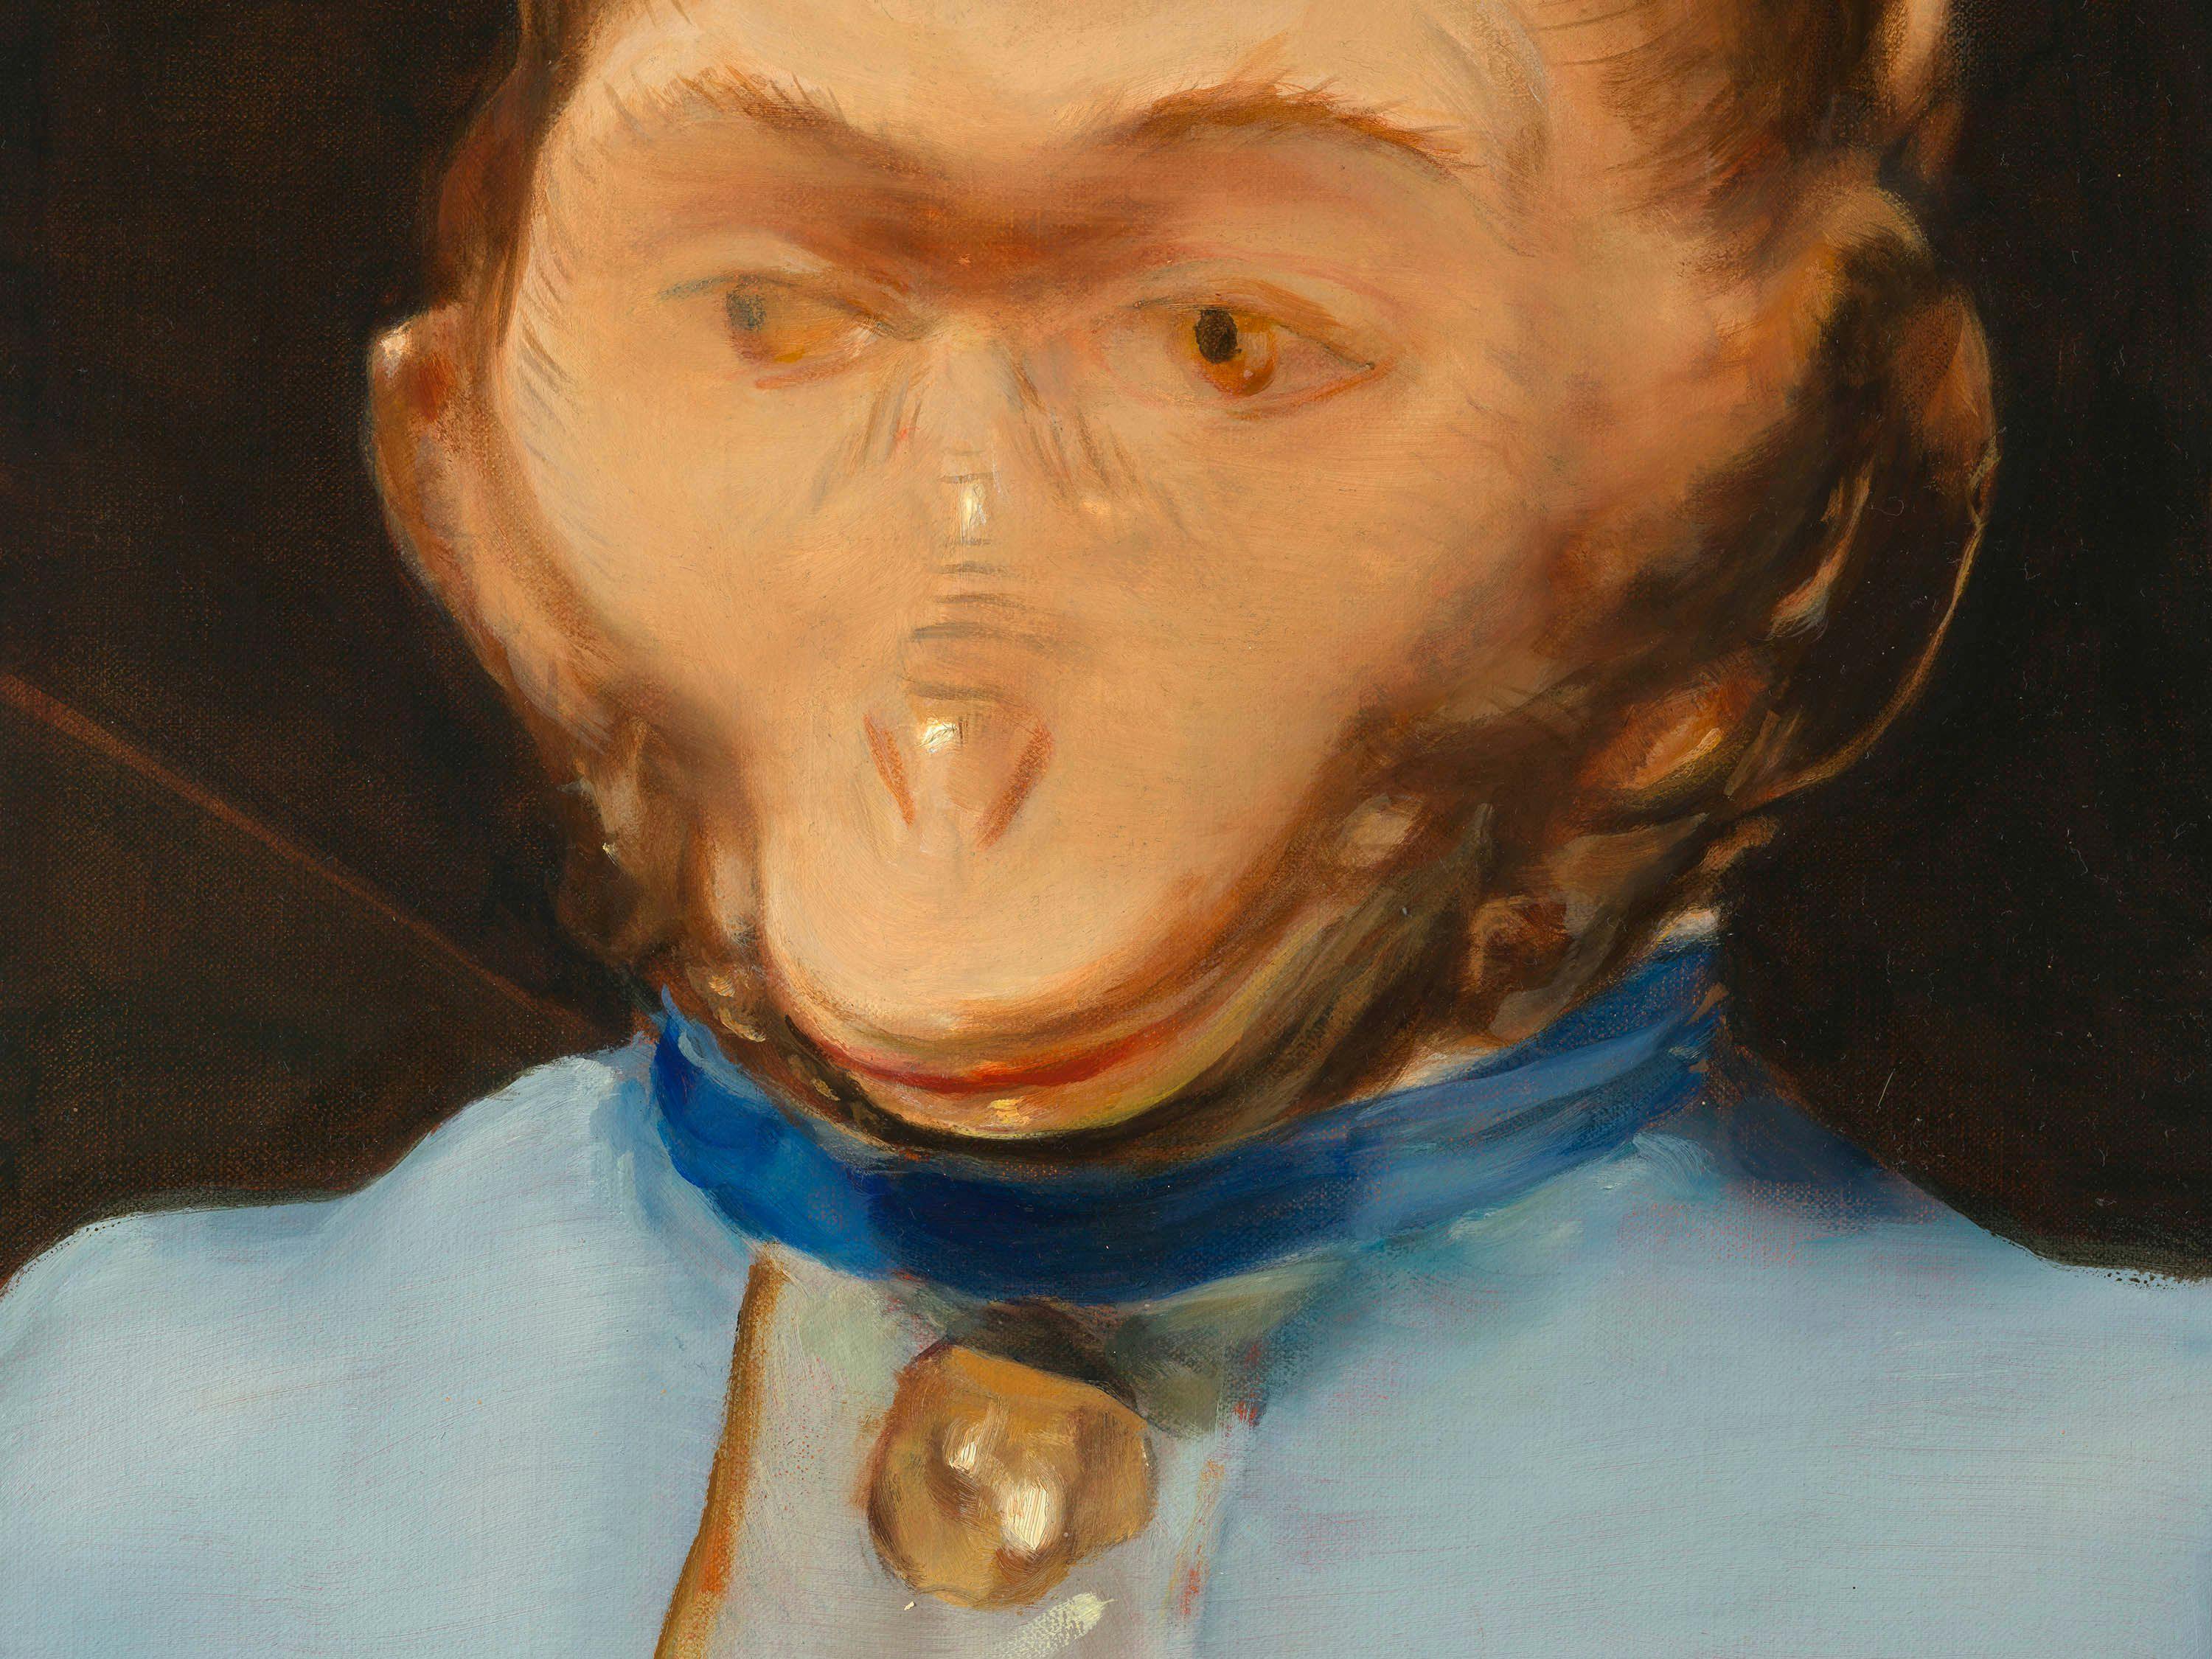 A detail from a painting by Michaël Borremans, titled The Monkey (The Queen), dated 2023.